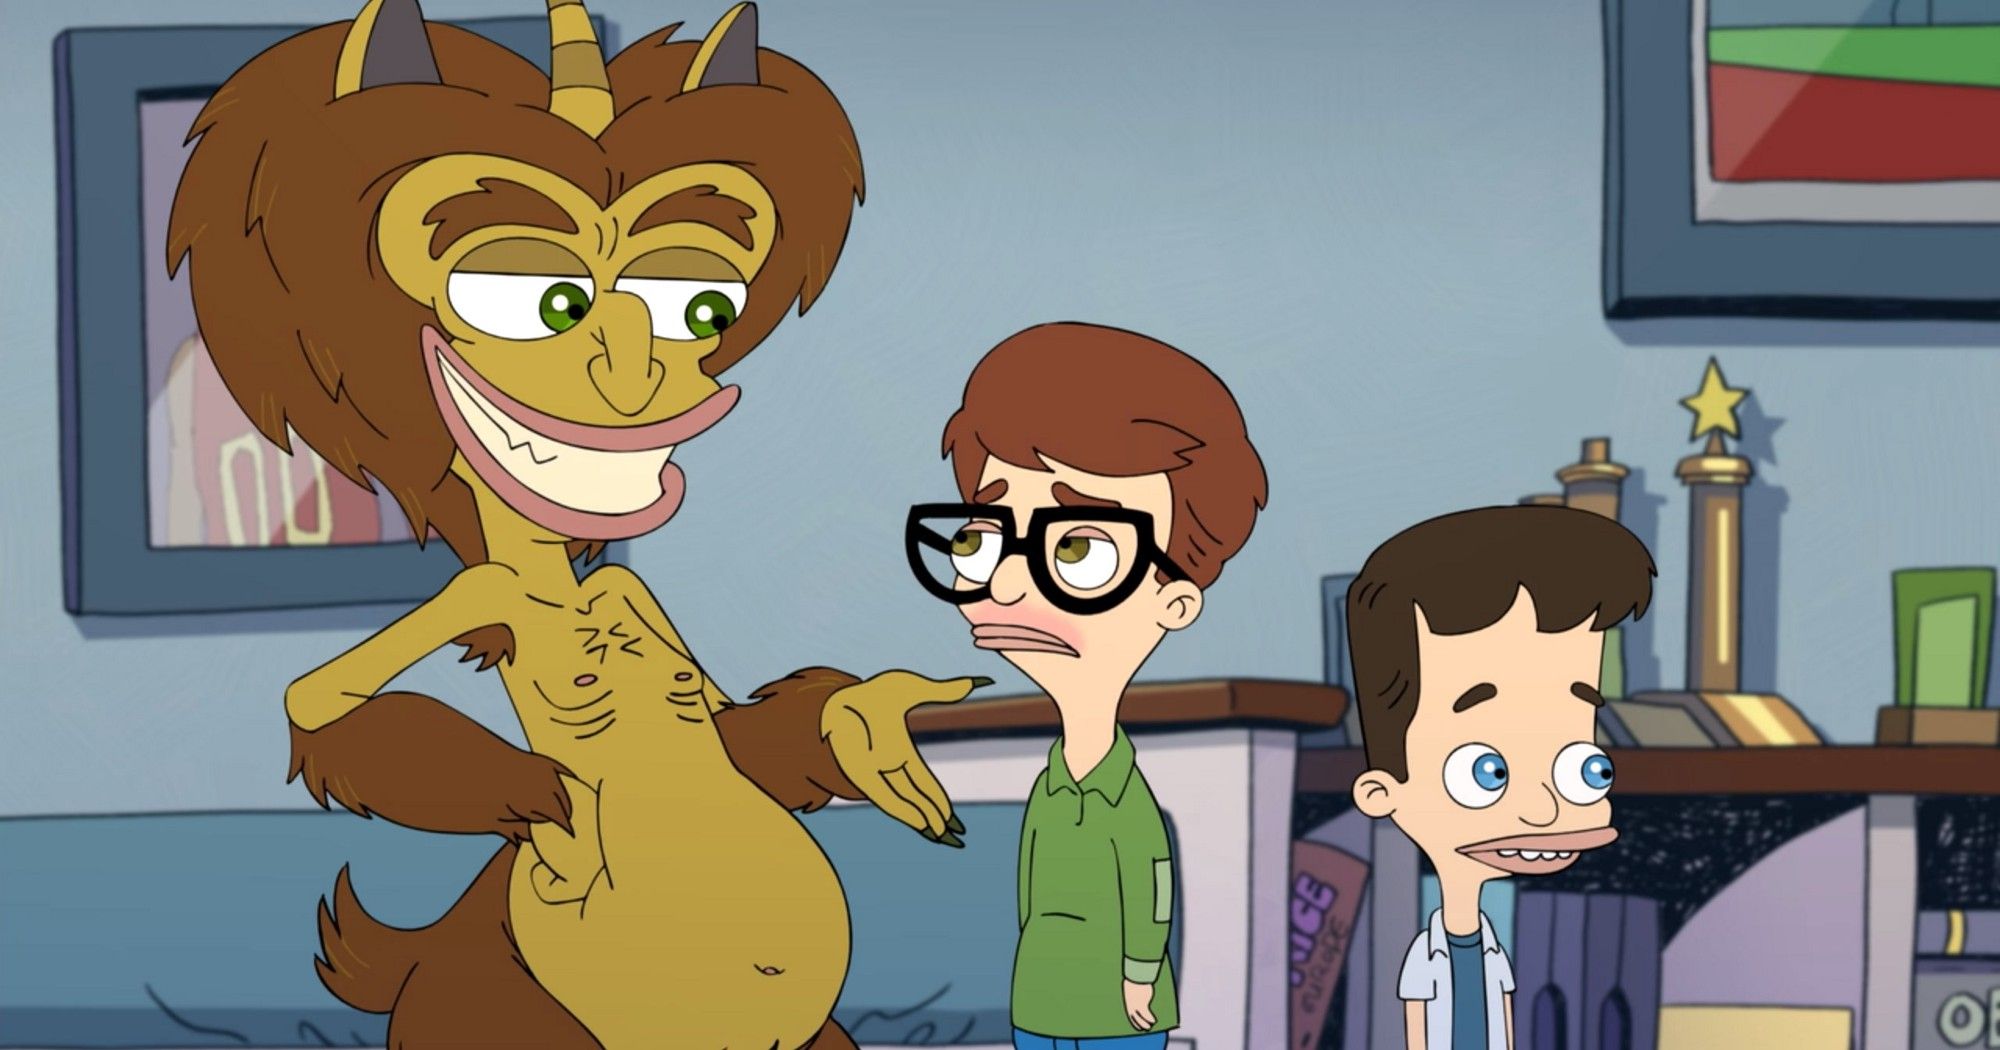 The Hormone Monster, Andrew, and Nick on Big Mouth